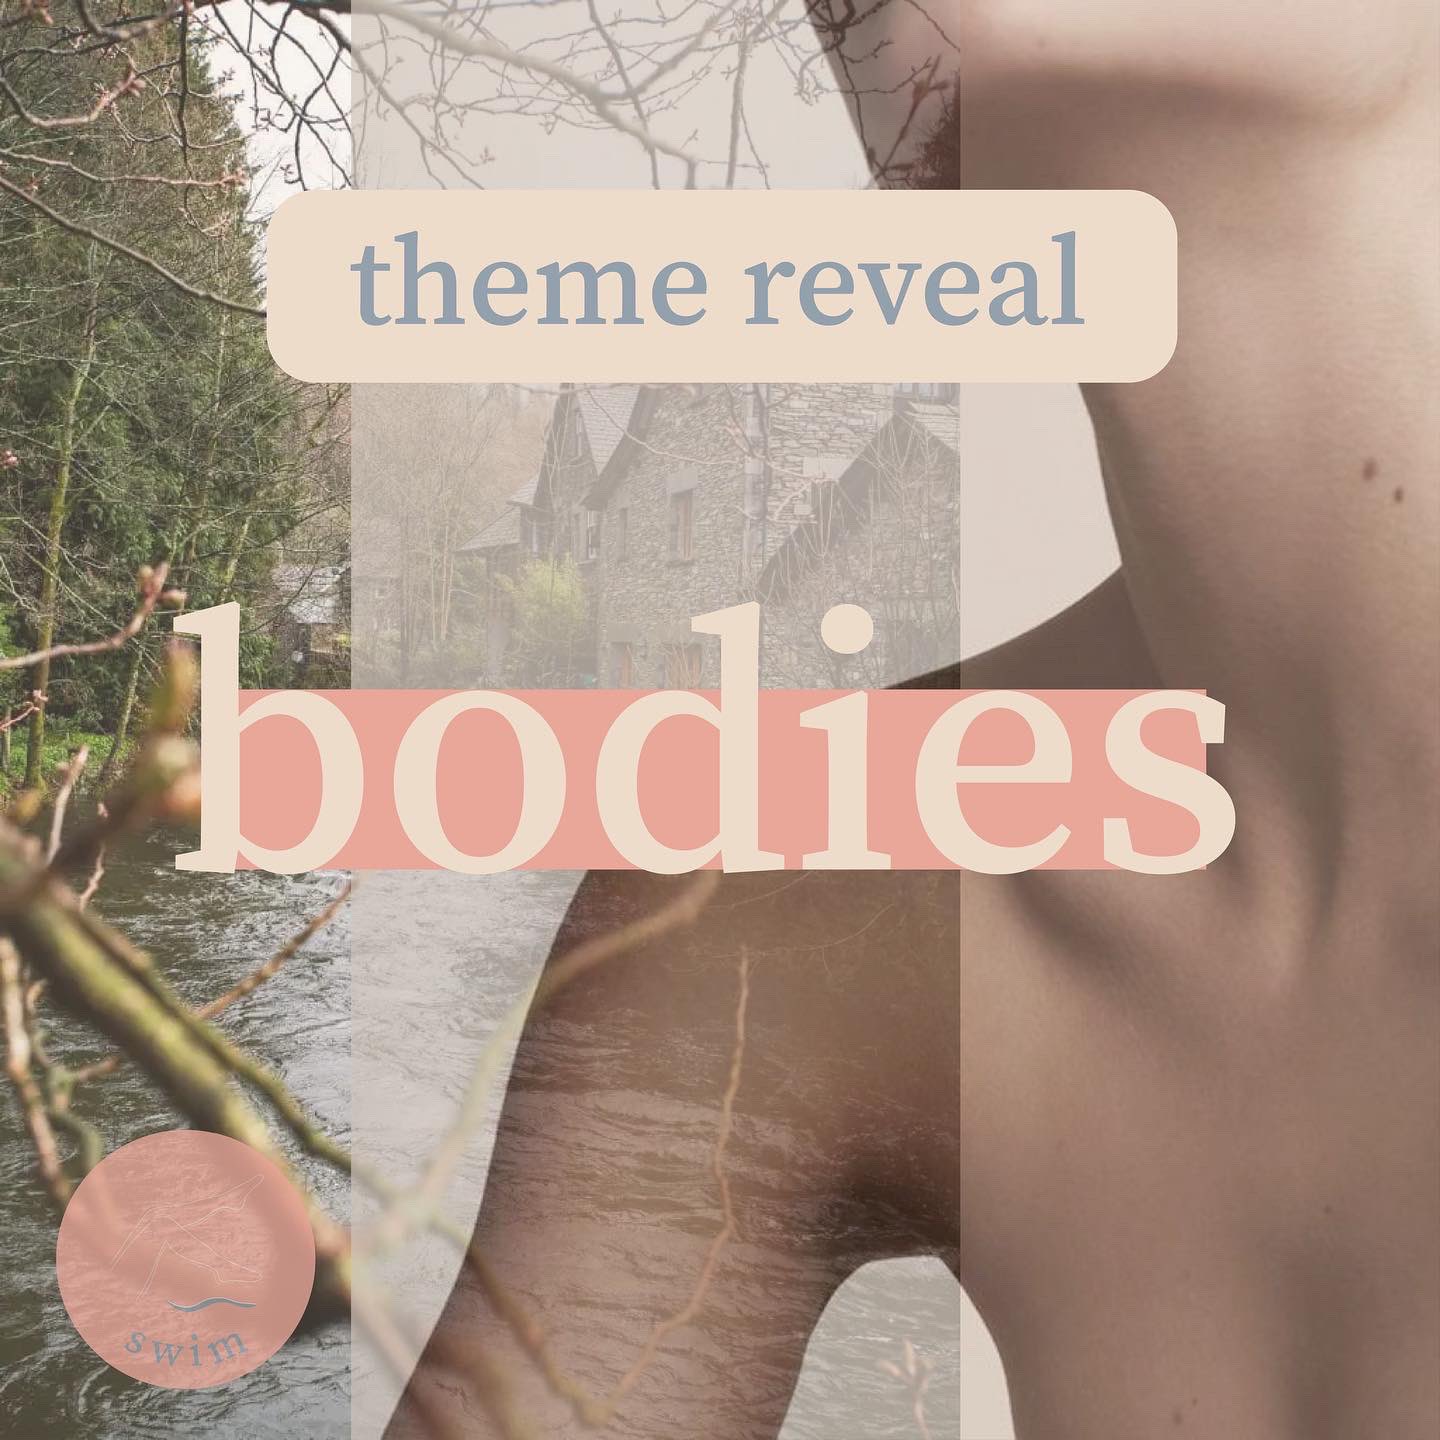 Someone's bare shoulder superimposed over a scene of an old town and river. "Swim Press. Theme reveal: bodies."